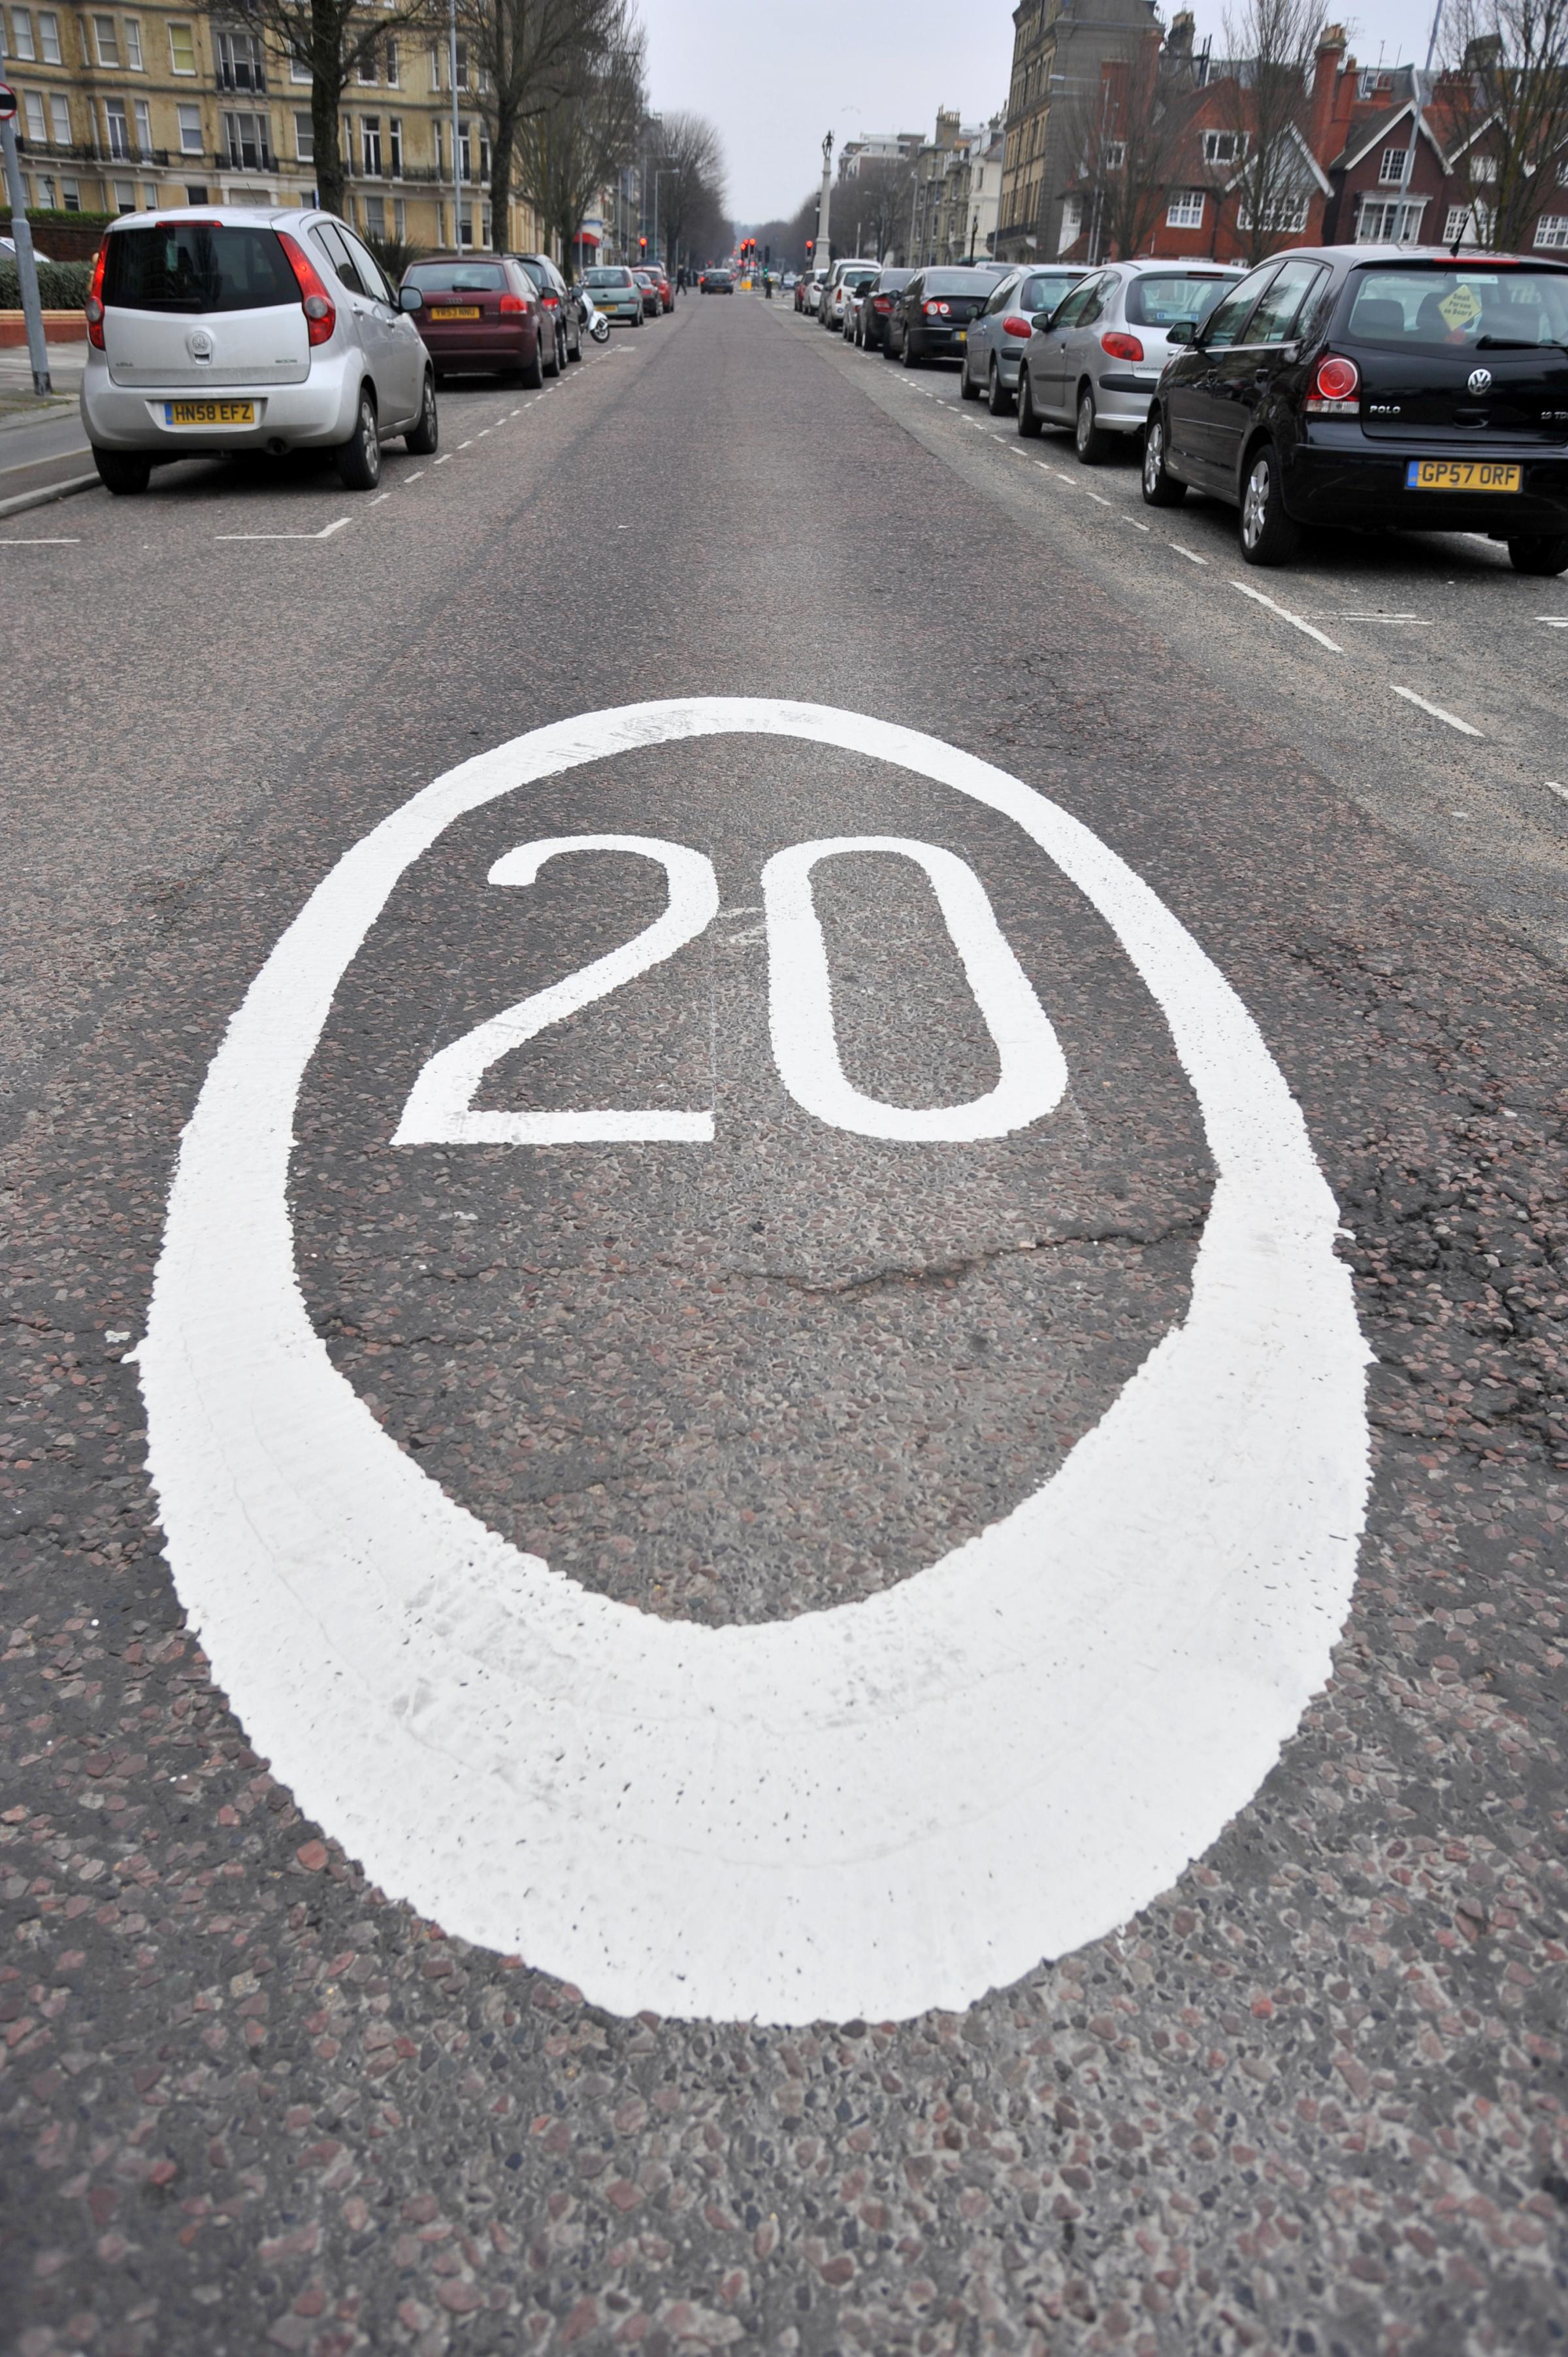 Green calls to extend 20 mph to every city street